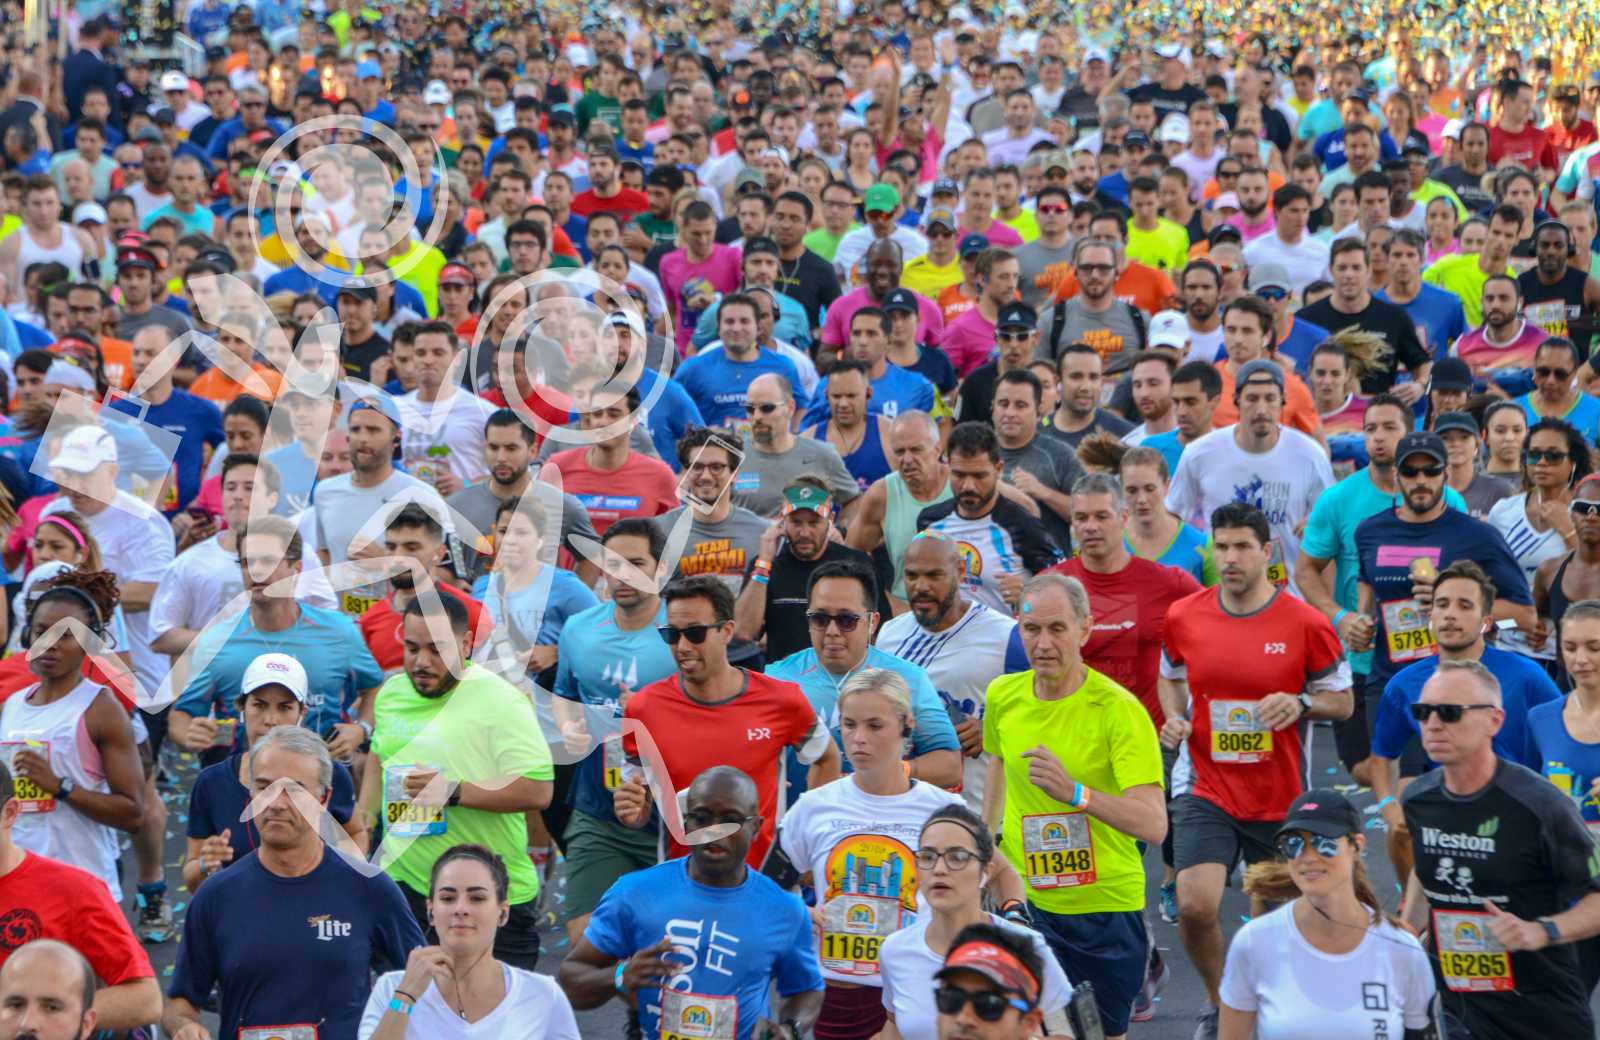 Mercedes-Benz Corporate Run presented by Turkish Airlines